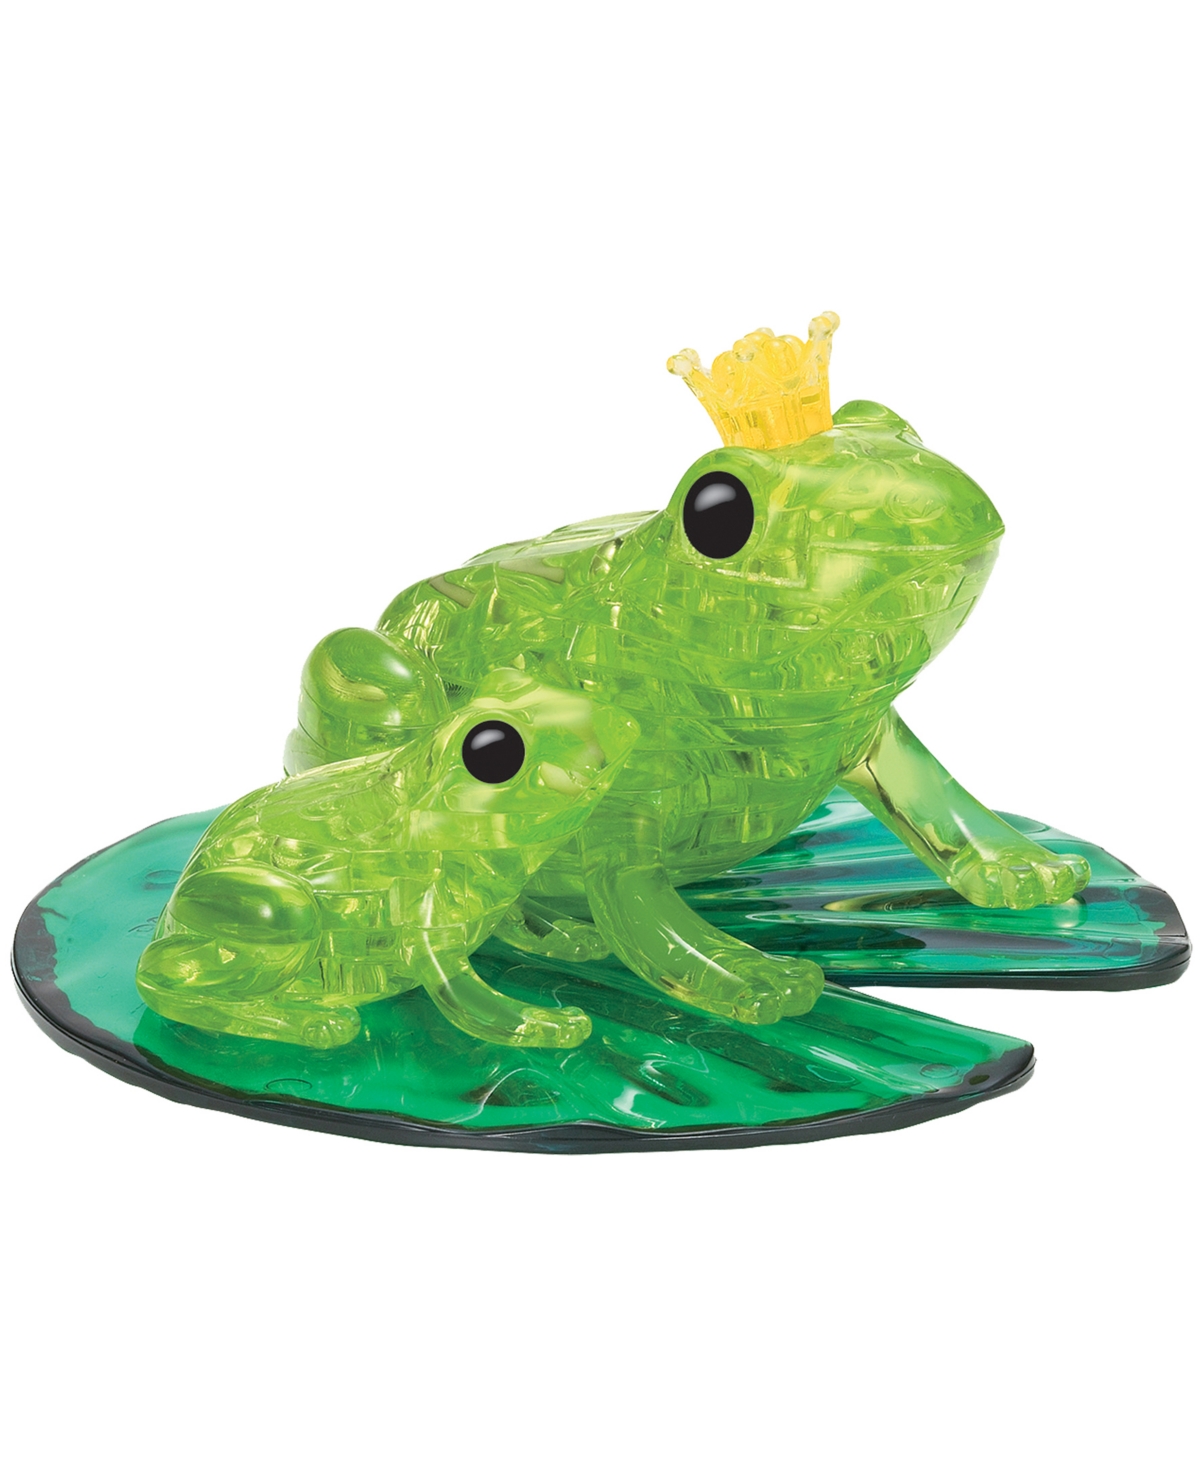 Bepuzzled 3d Frog Crystal Puzzle Set, 43 Piece In Green